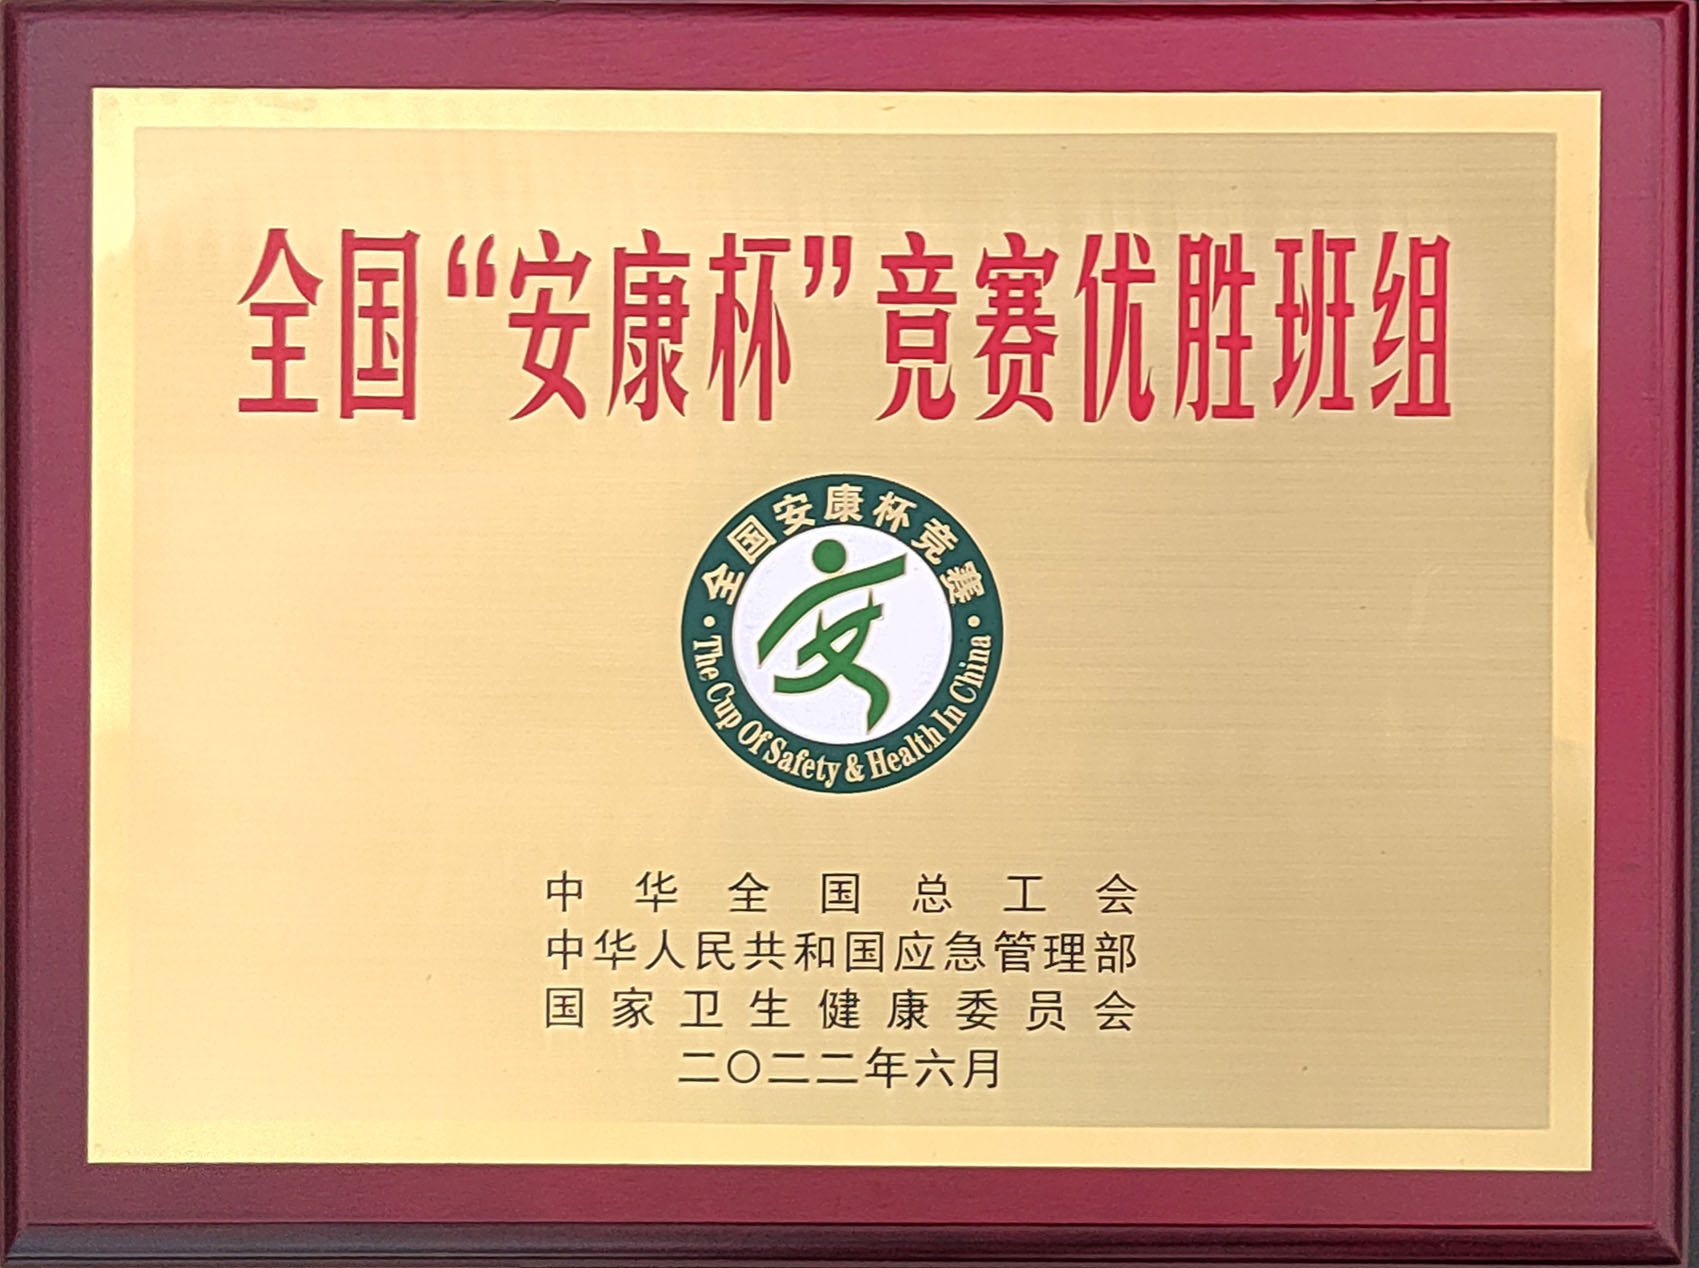 Jixin high-temperature forming team won the title of national 